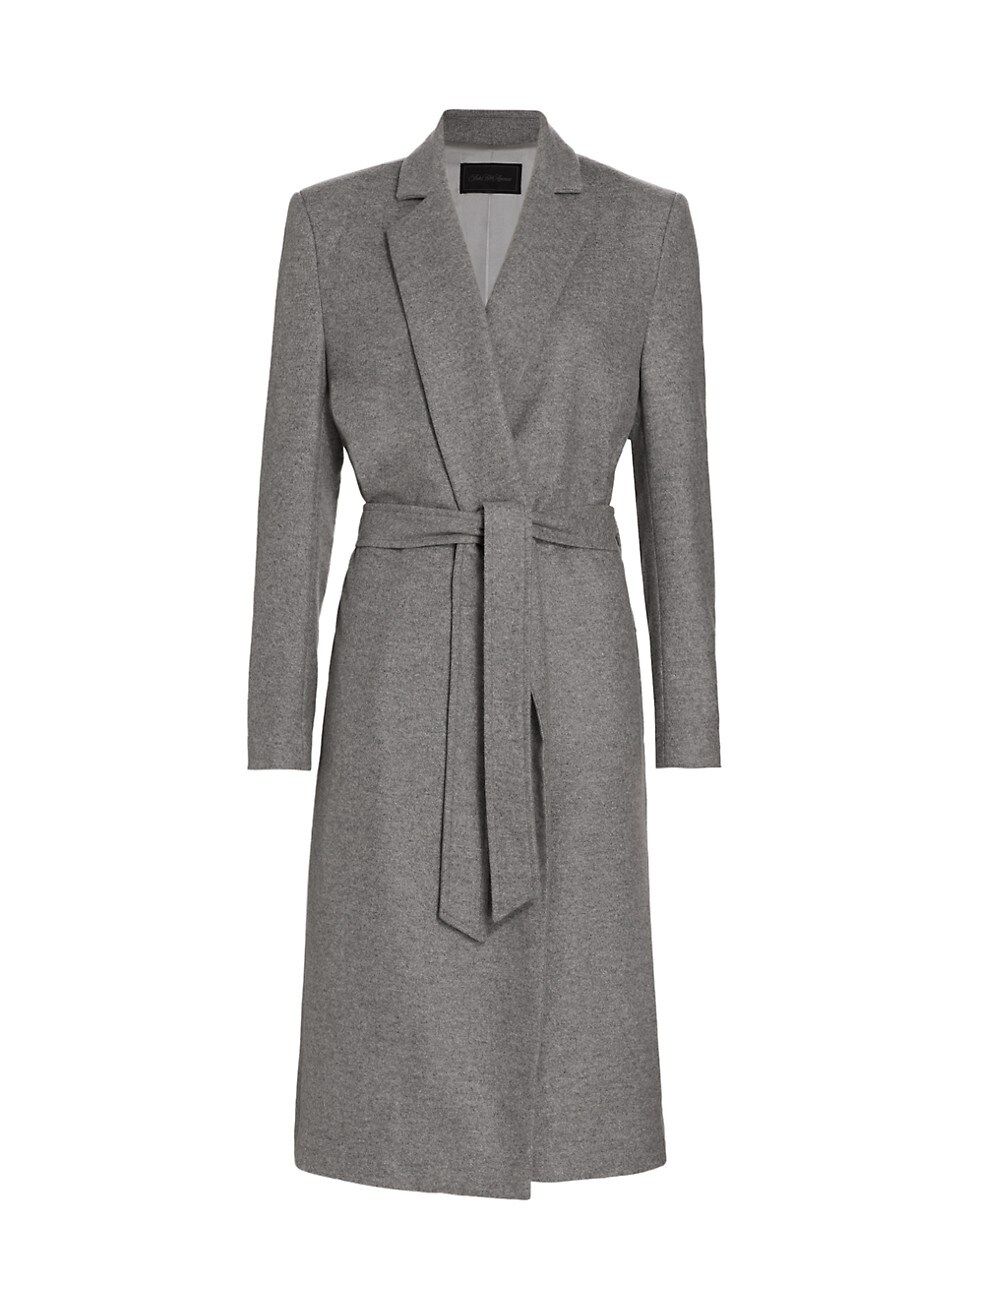 Saks Fifth Avenue COLLECTION Wool Belted Jacket | Saks Fifth Avenue